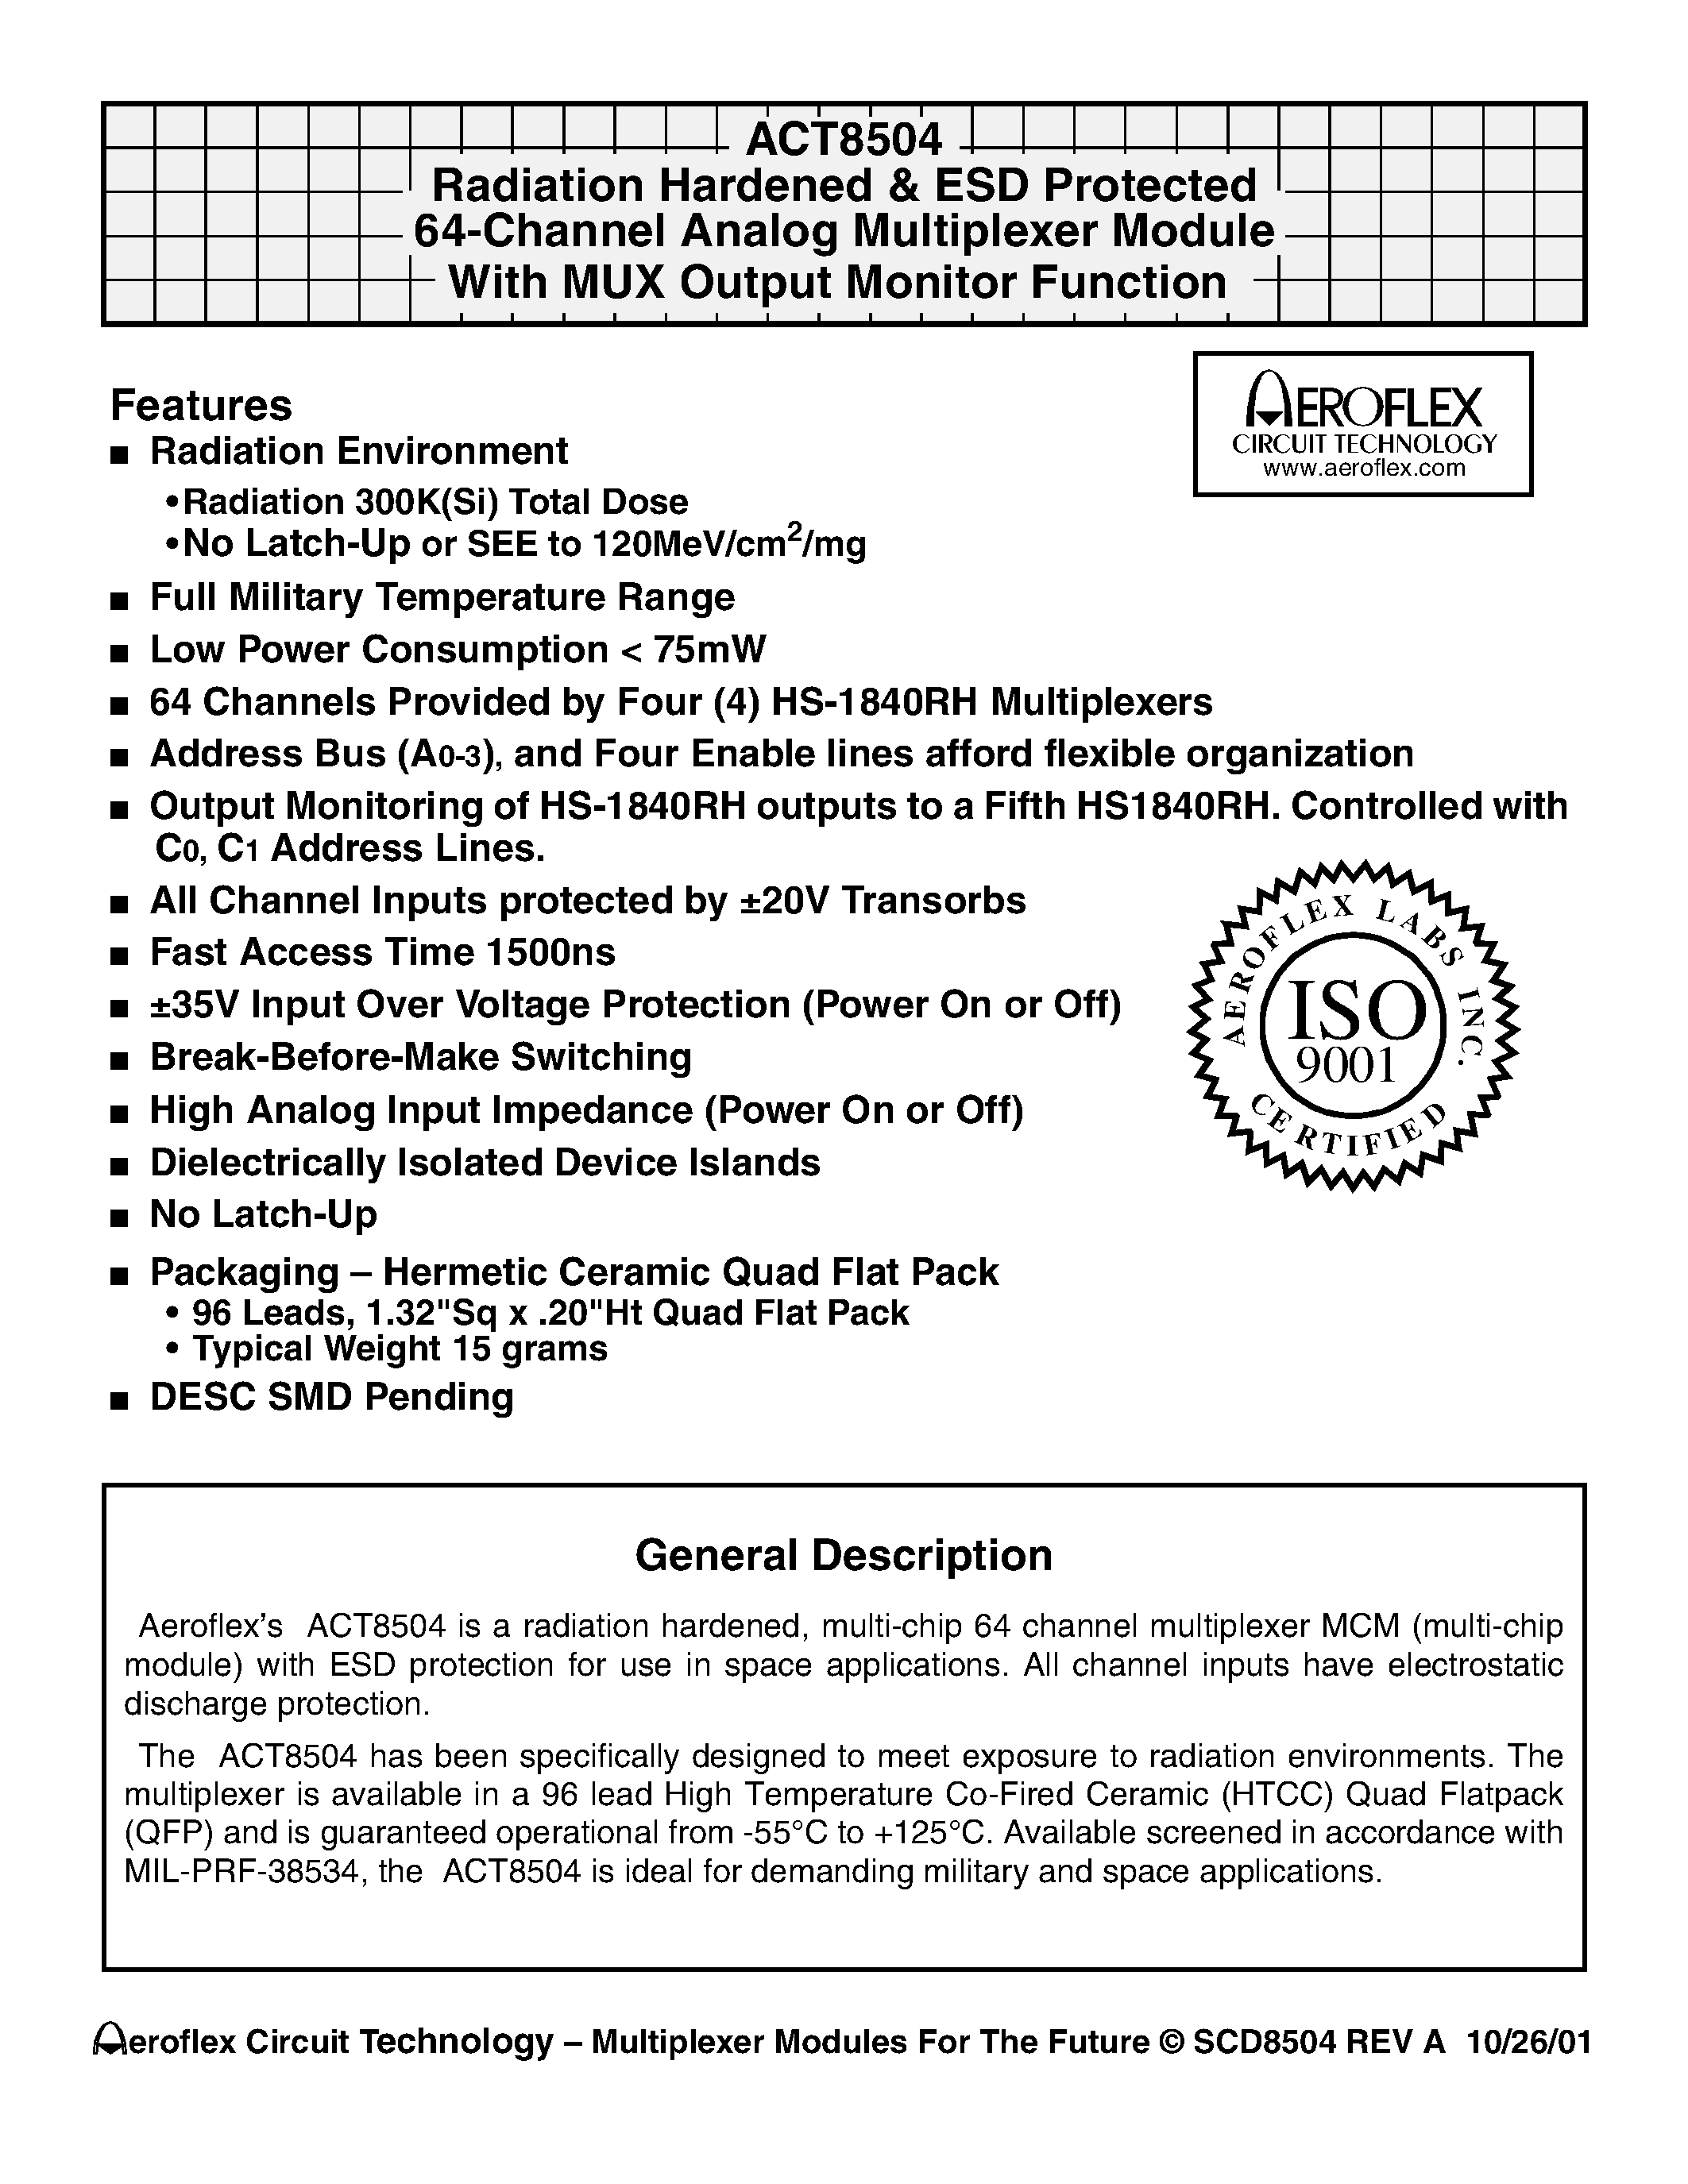 Datasheet ACT8504-T - ACT8504 Radiation Hardened & ESD Protected 64-Channel Analog Multiplexer Module With MUX Output Monitor Function page 1